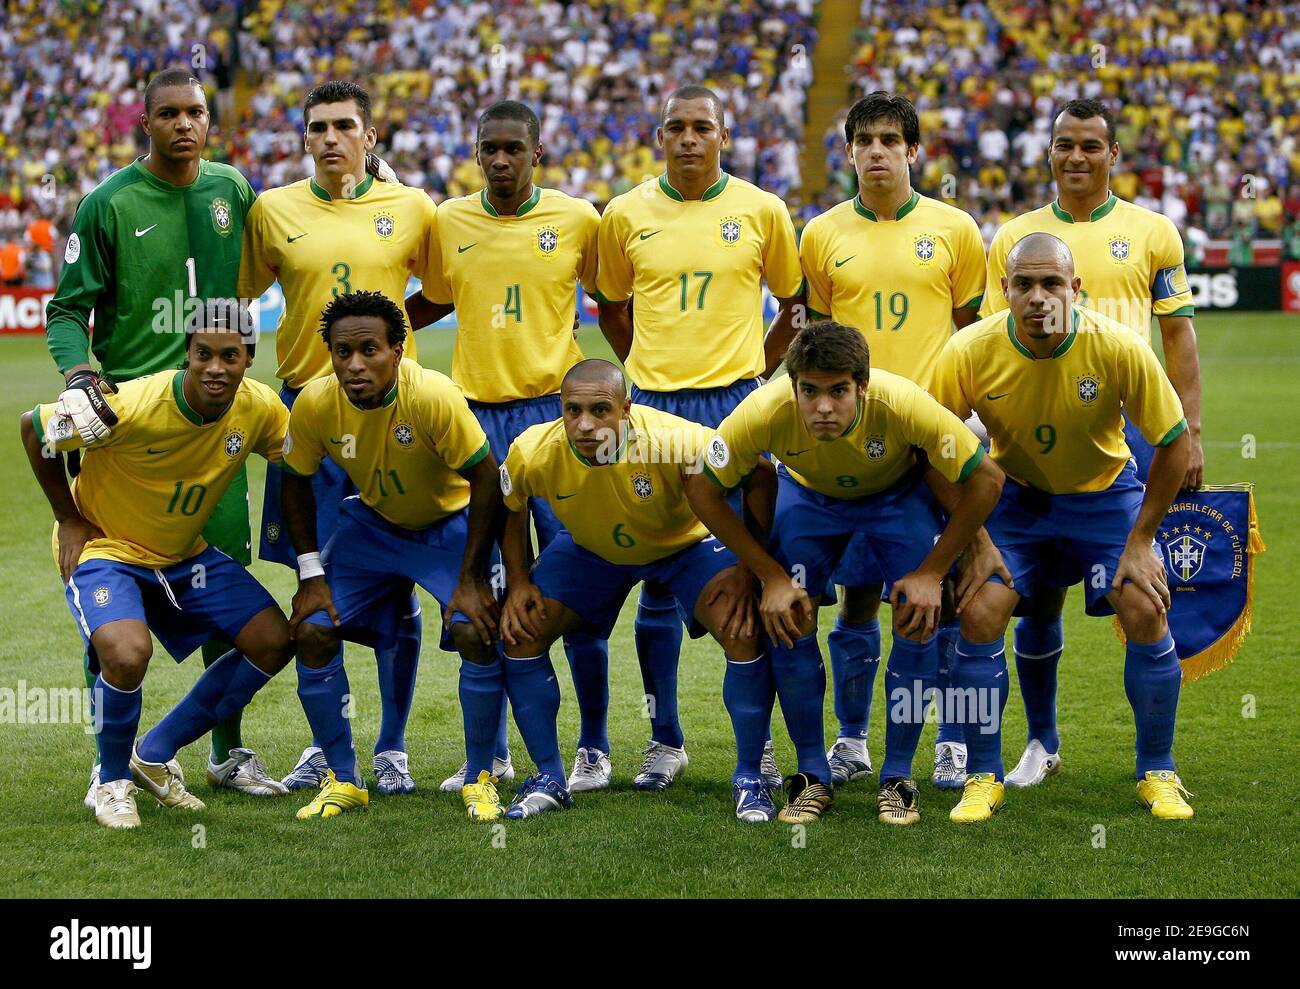 Brazil's soccer team during the World Cup 2006, quater-final